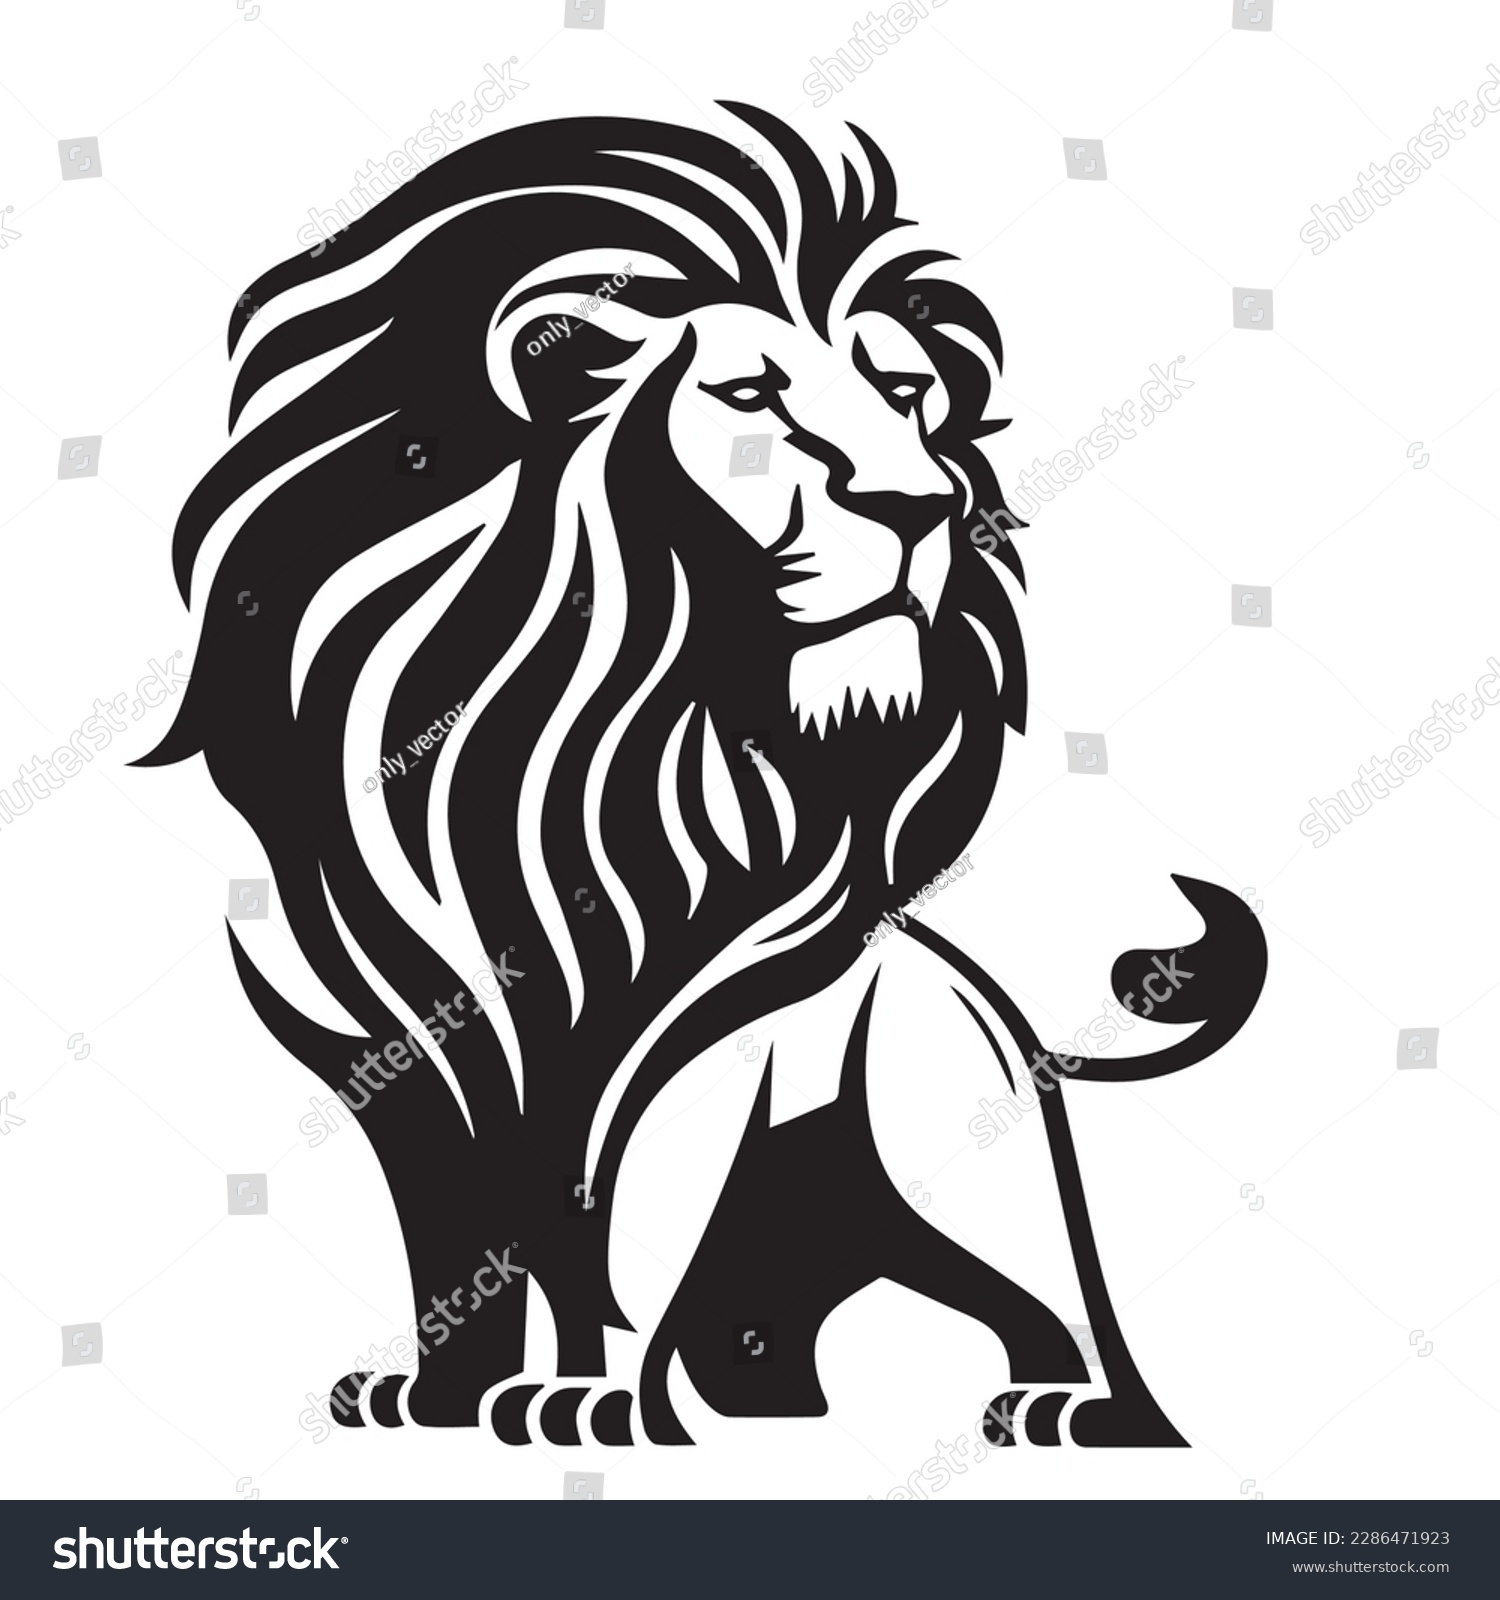 SVG of Lion head on a white background. Vector silhouette svg illustration. svg